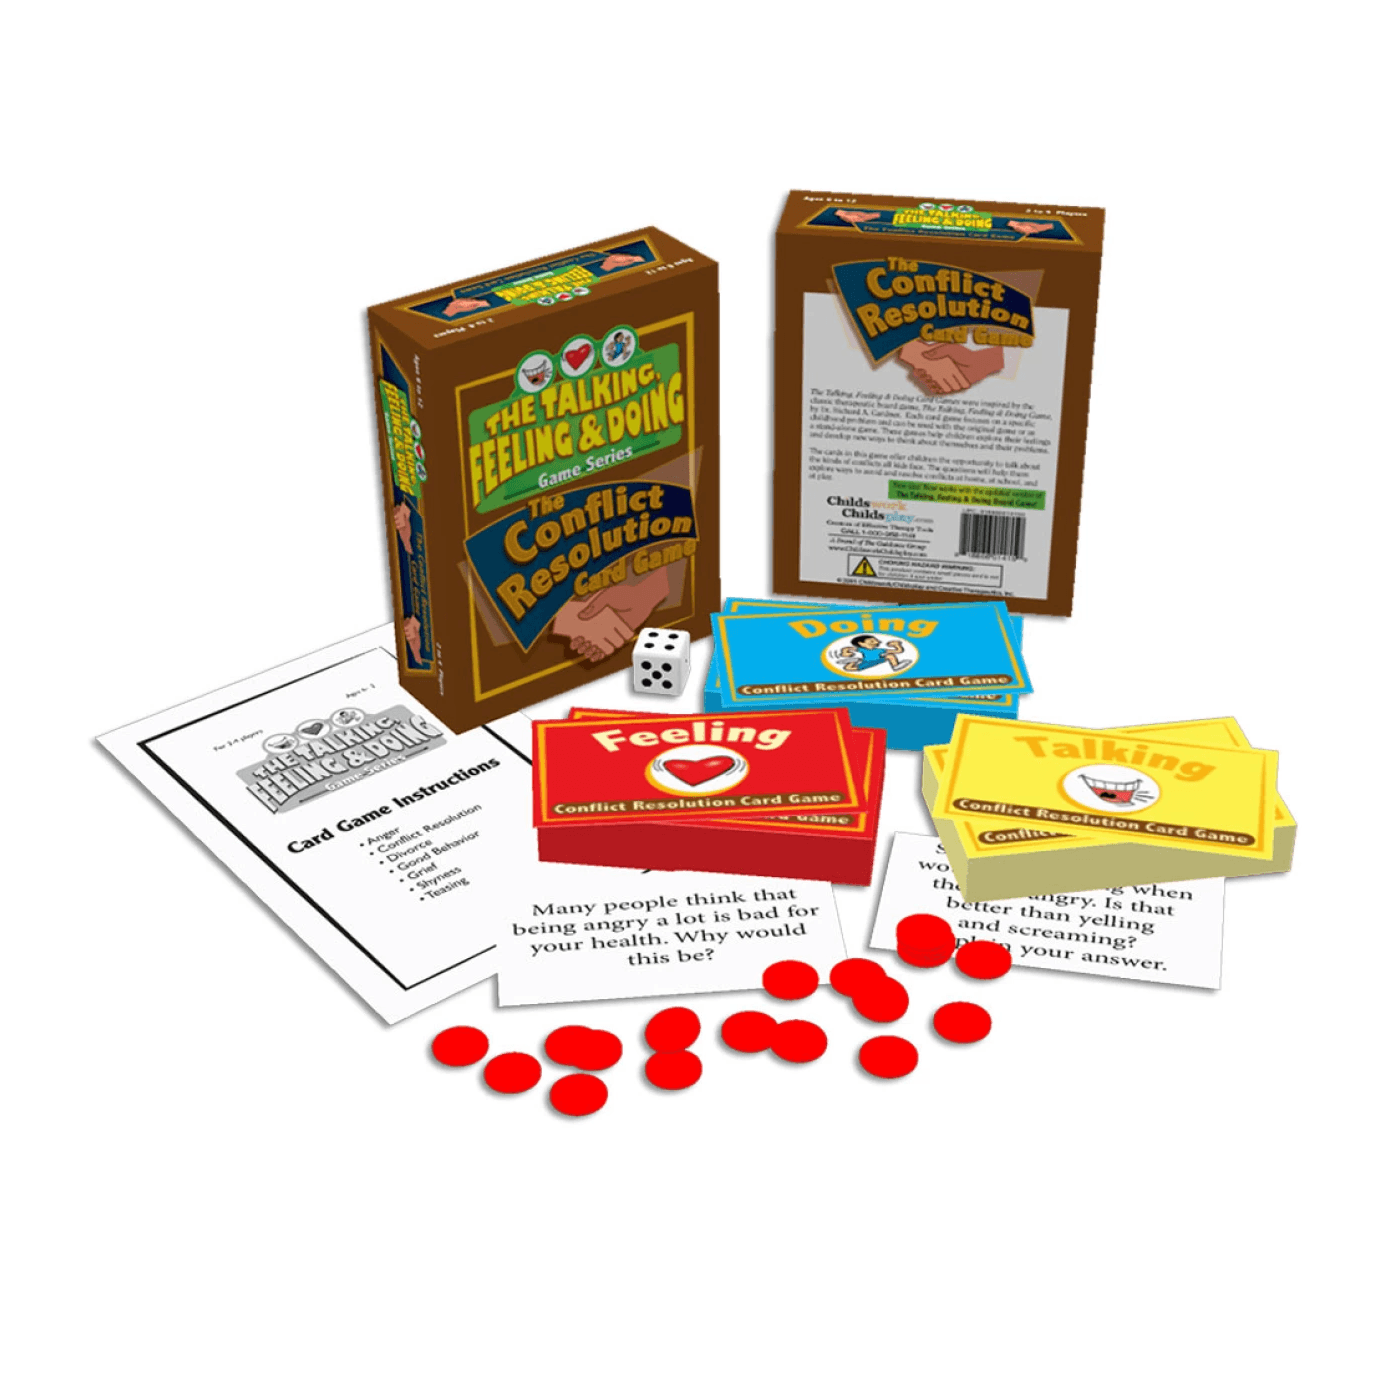 Montessori Childswork Childsplay The Talking, Feeling & Doing Conflict Resolution Card Game